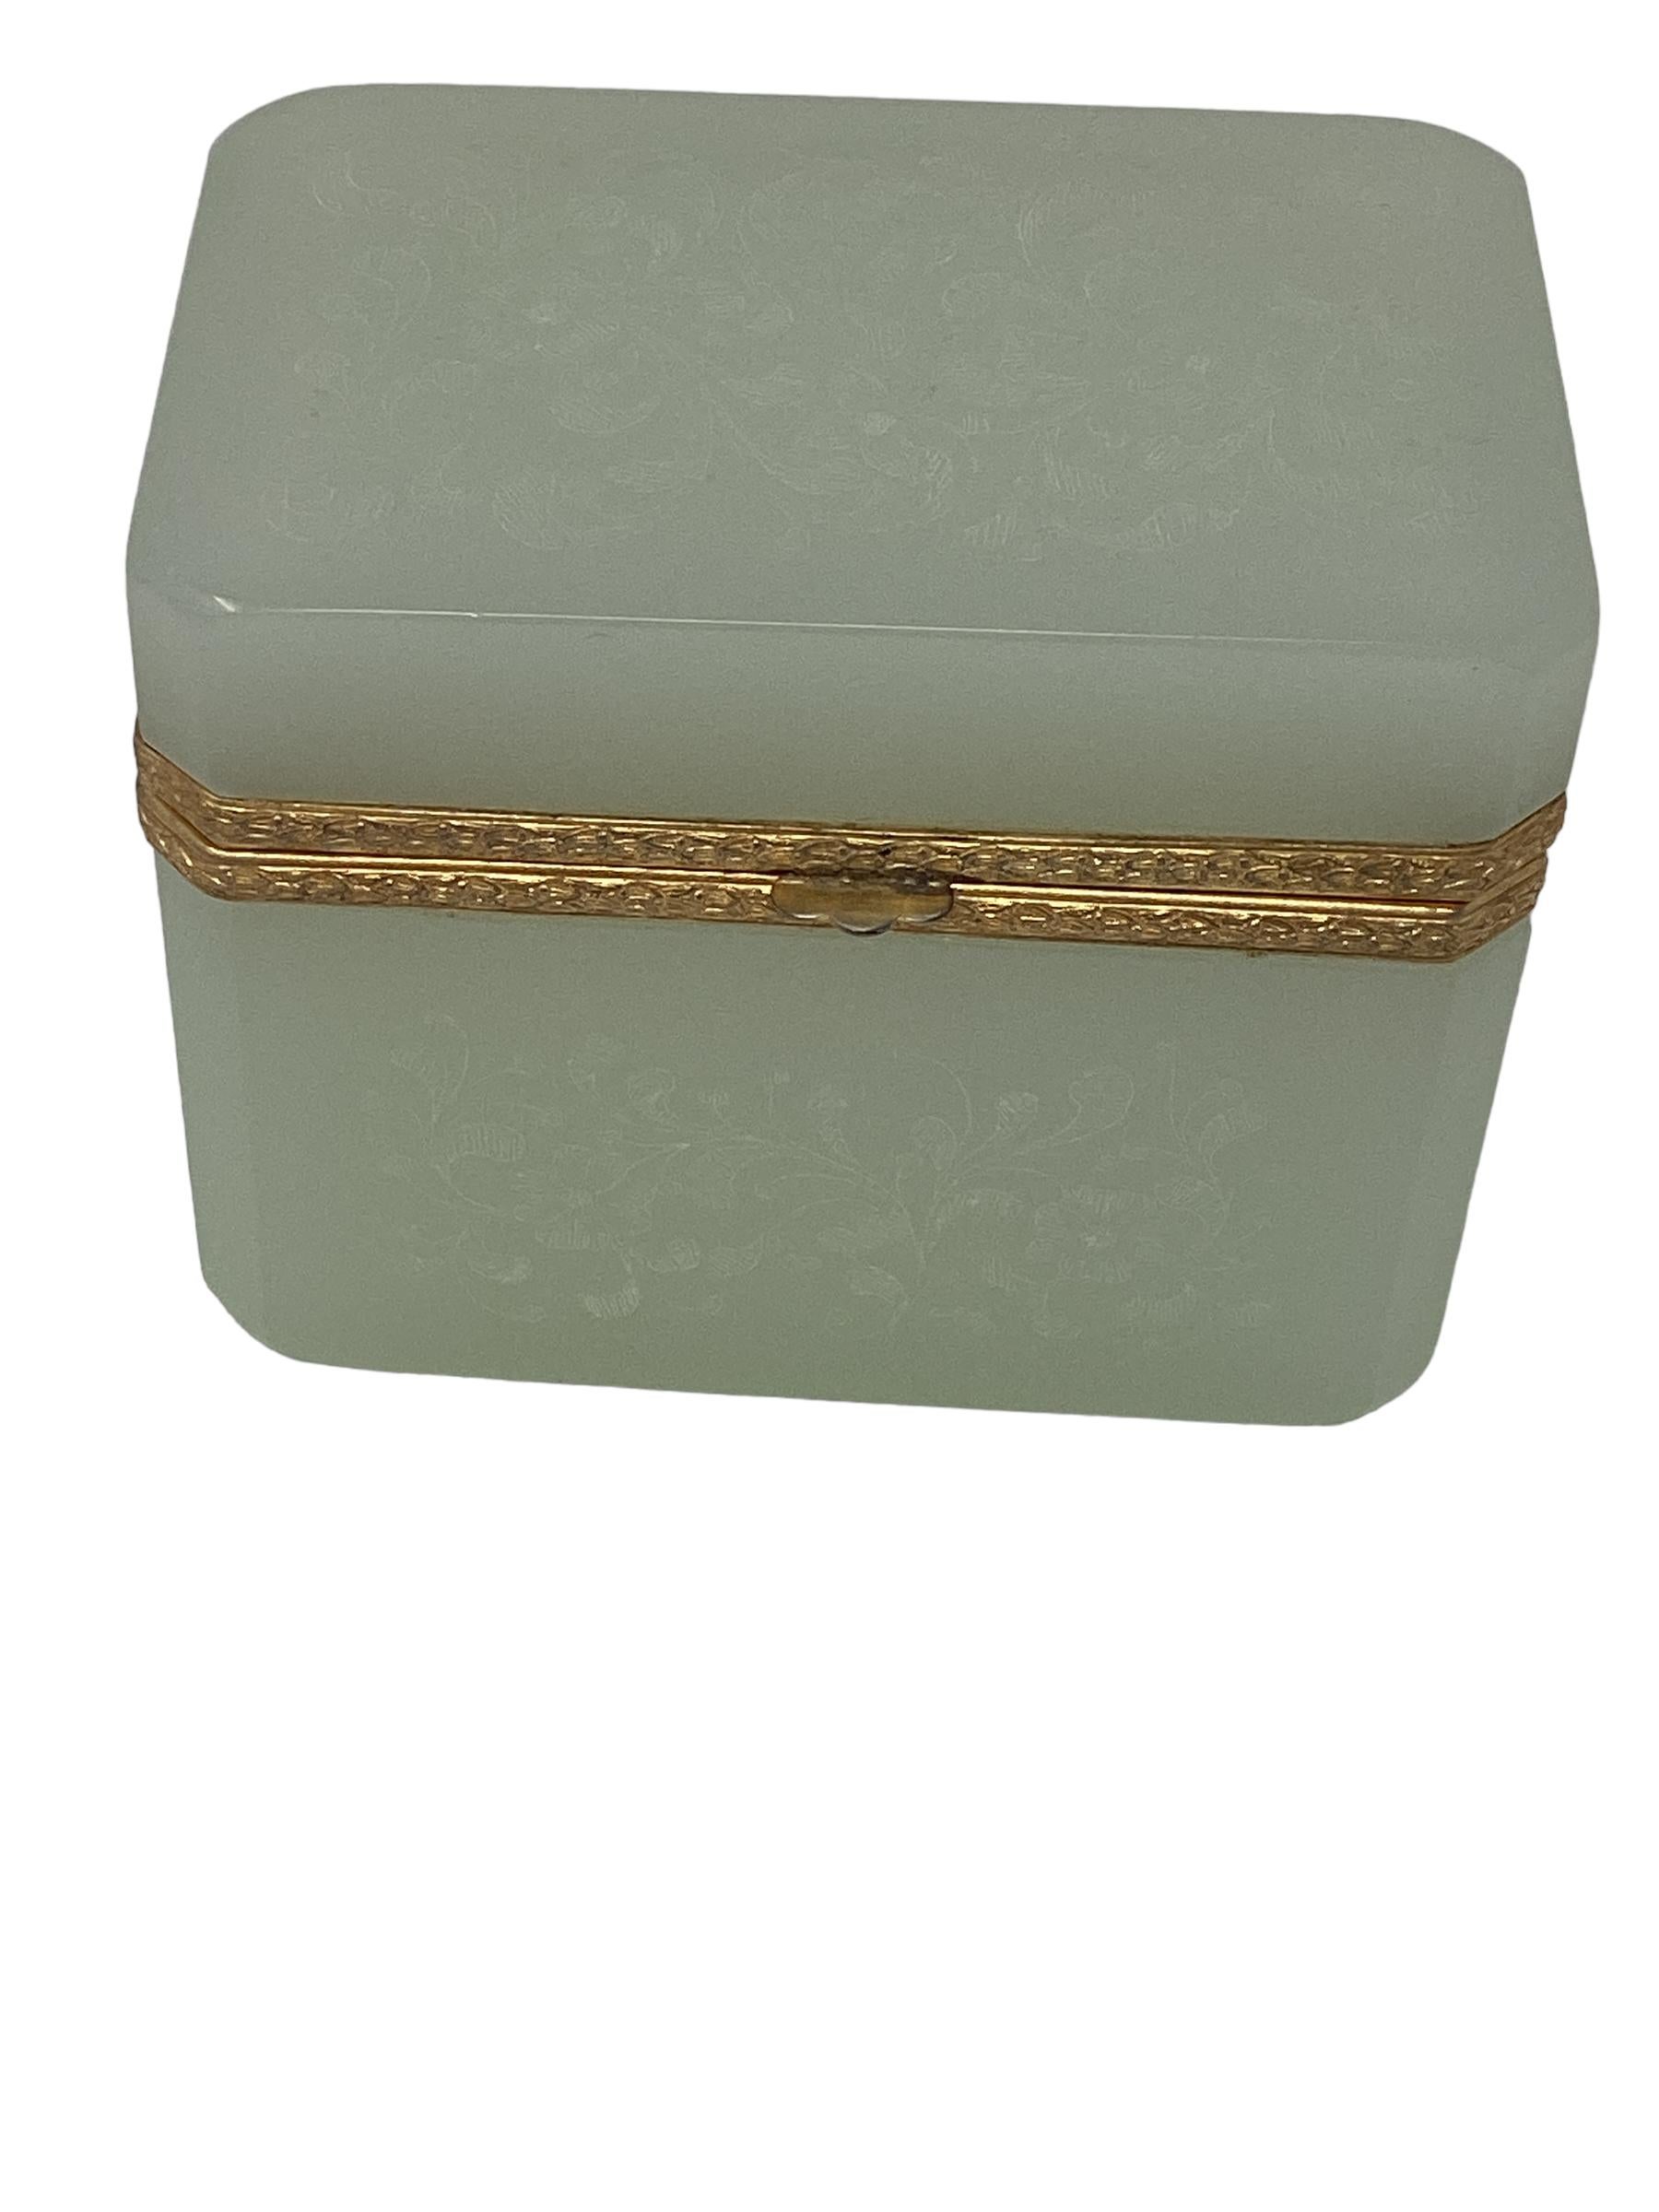 Antique French Green Opaline Box with Etched Decoration  In Good Condition For Sale In Chapel Hill, NC